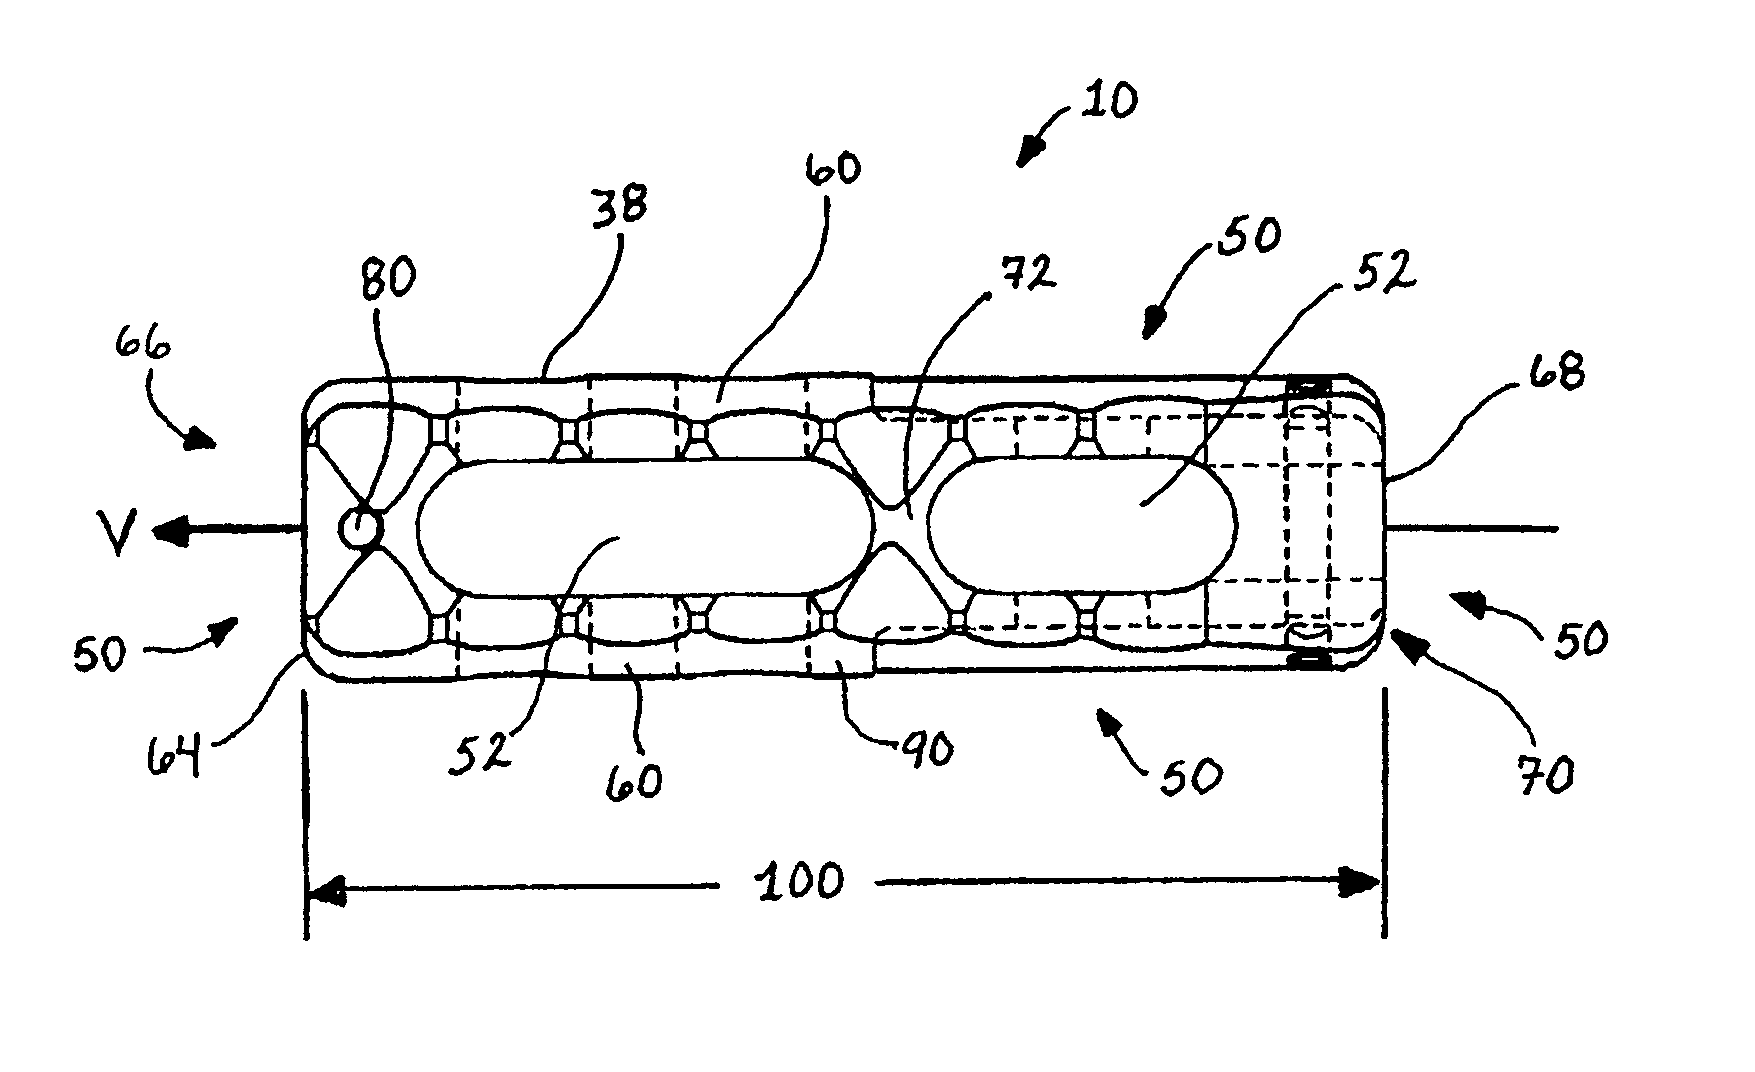 Spinal stabilization device and methods